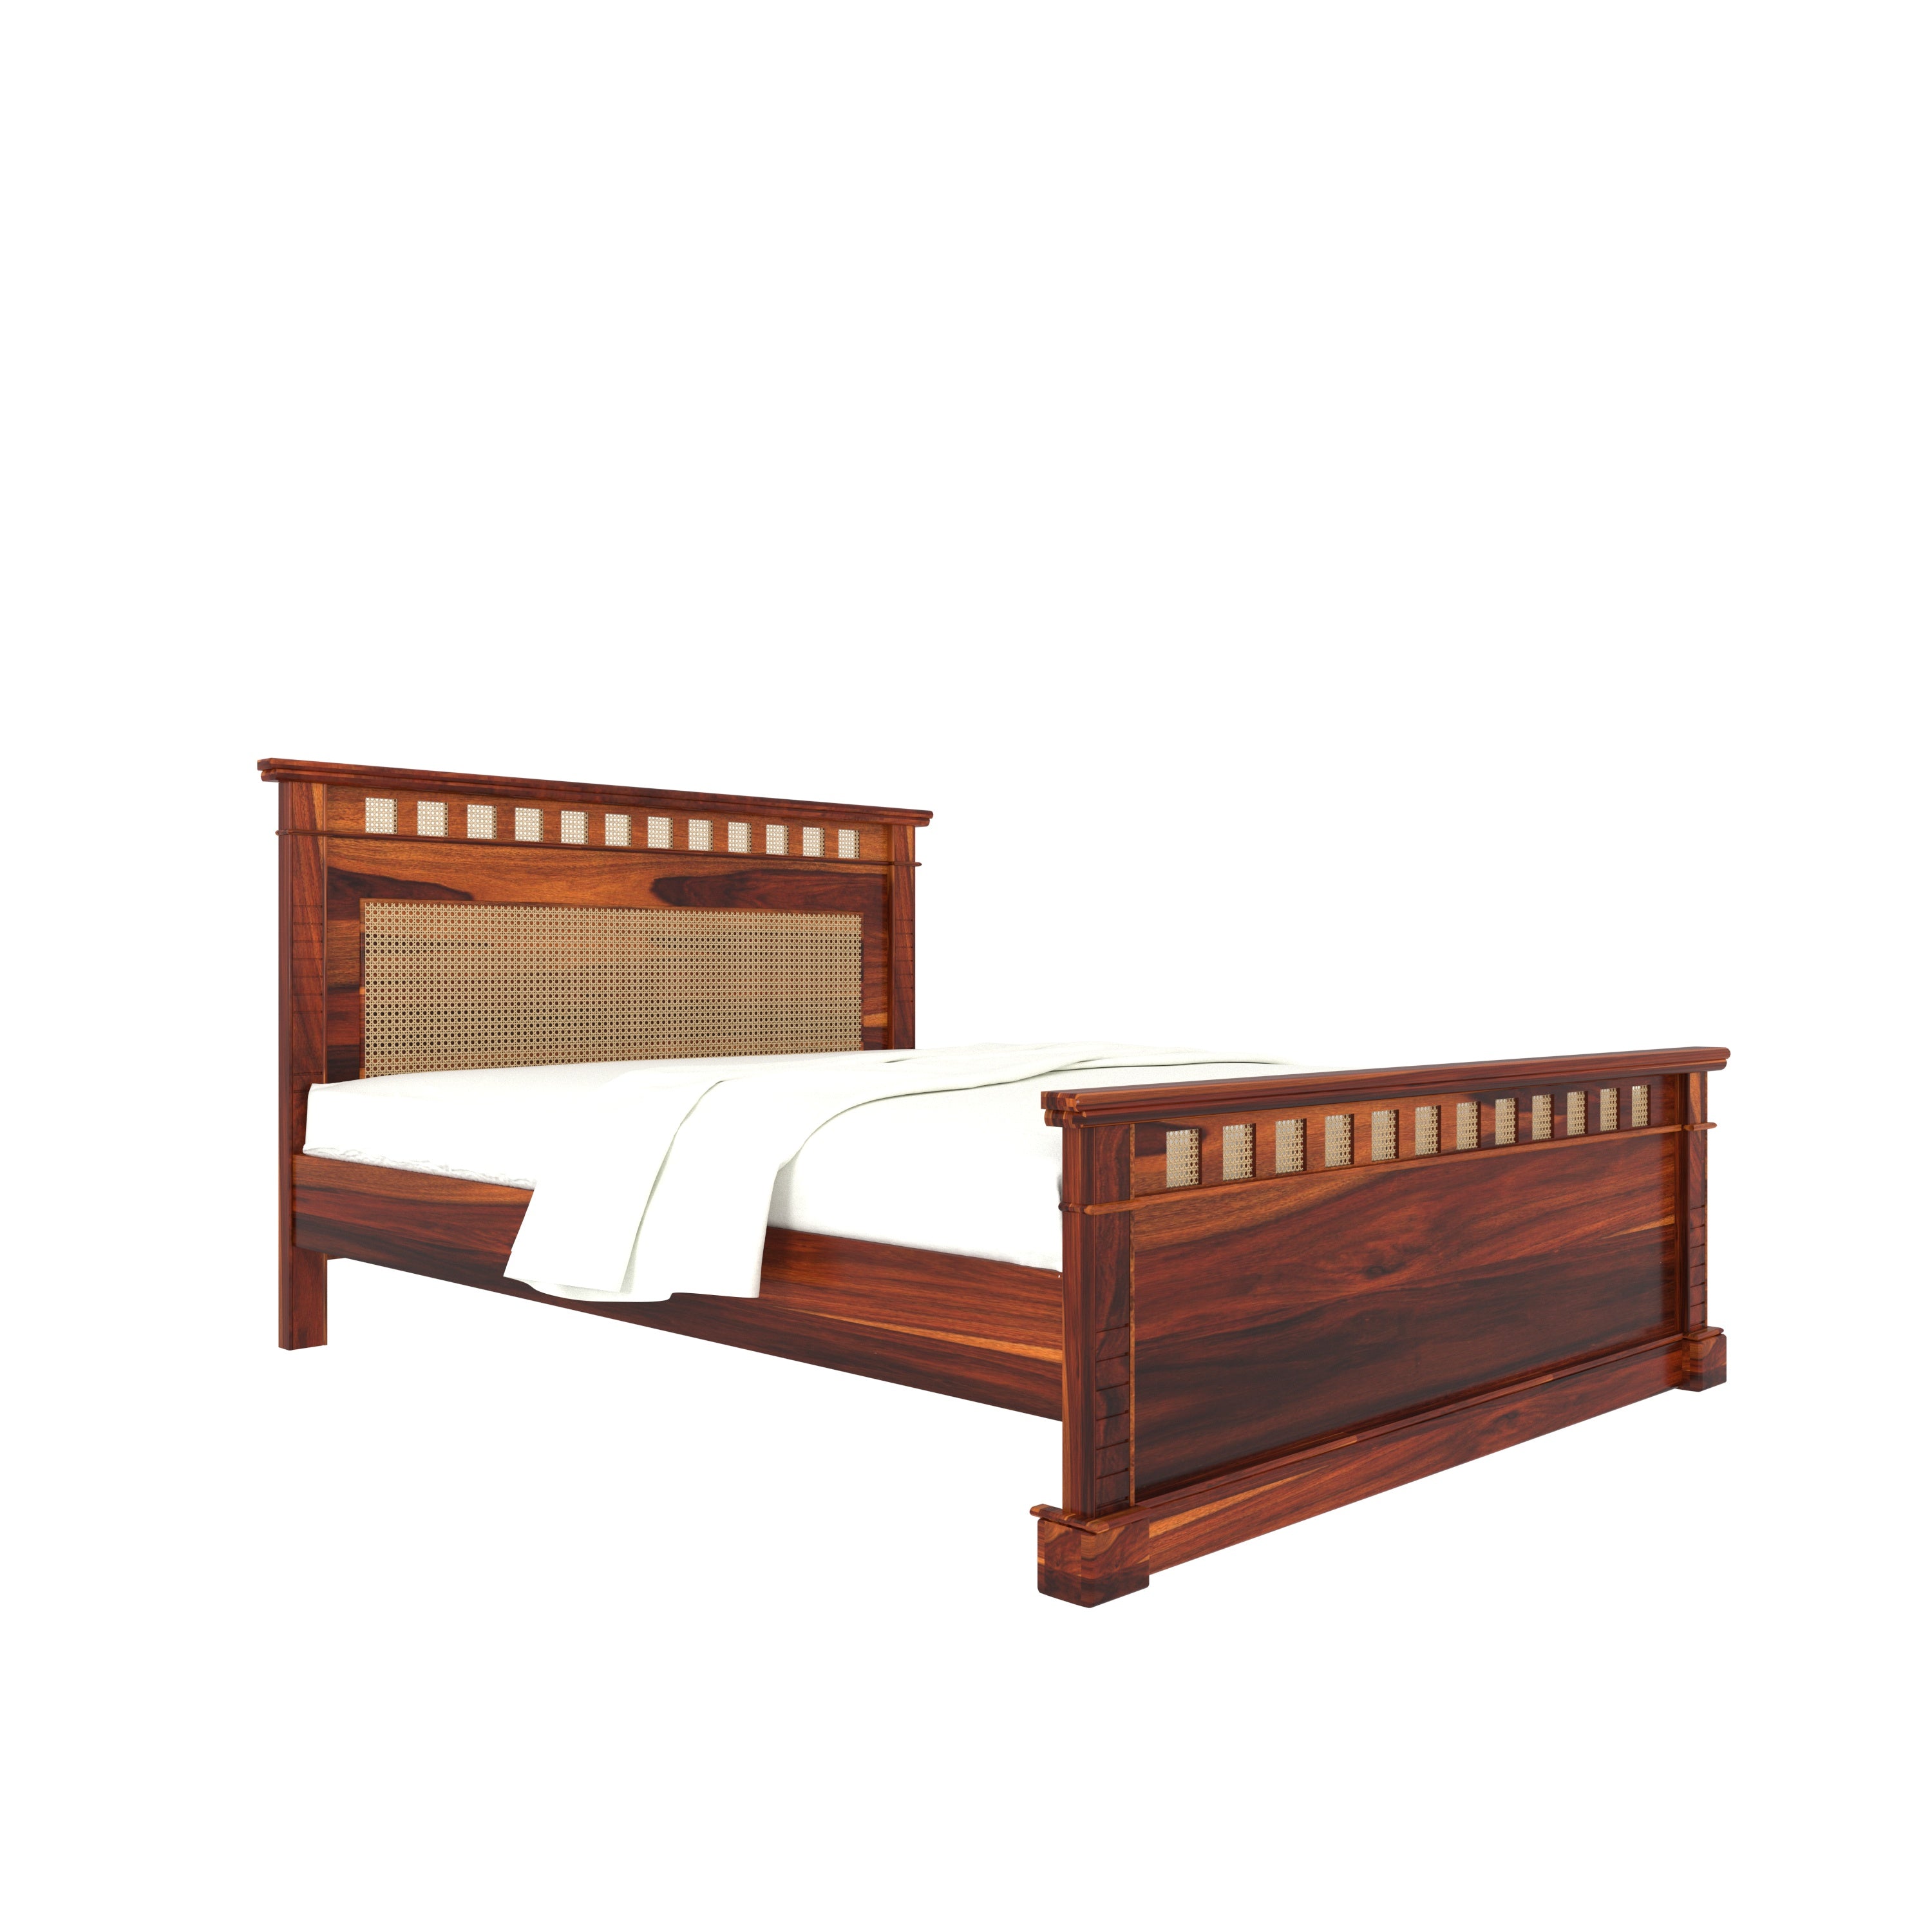 Aesthetic Vintage Style Wooden Handmade Bed with Double Drawer Bedside Bedroom Furniture Sets